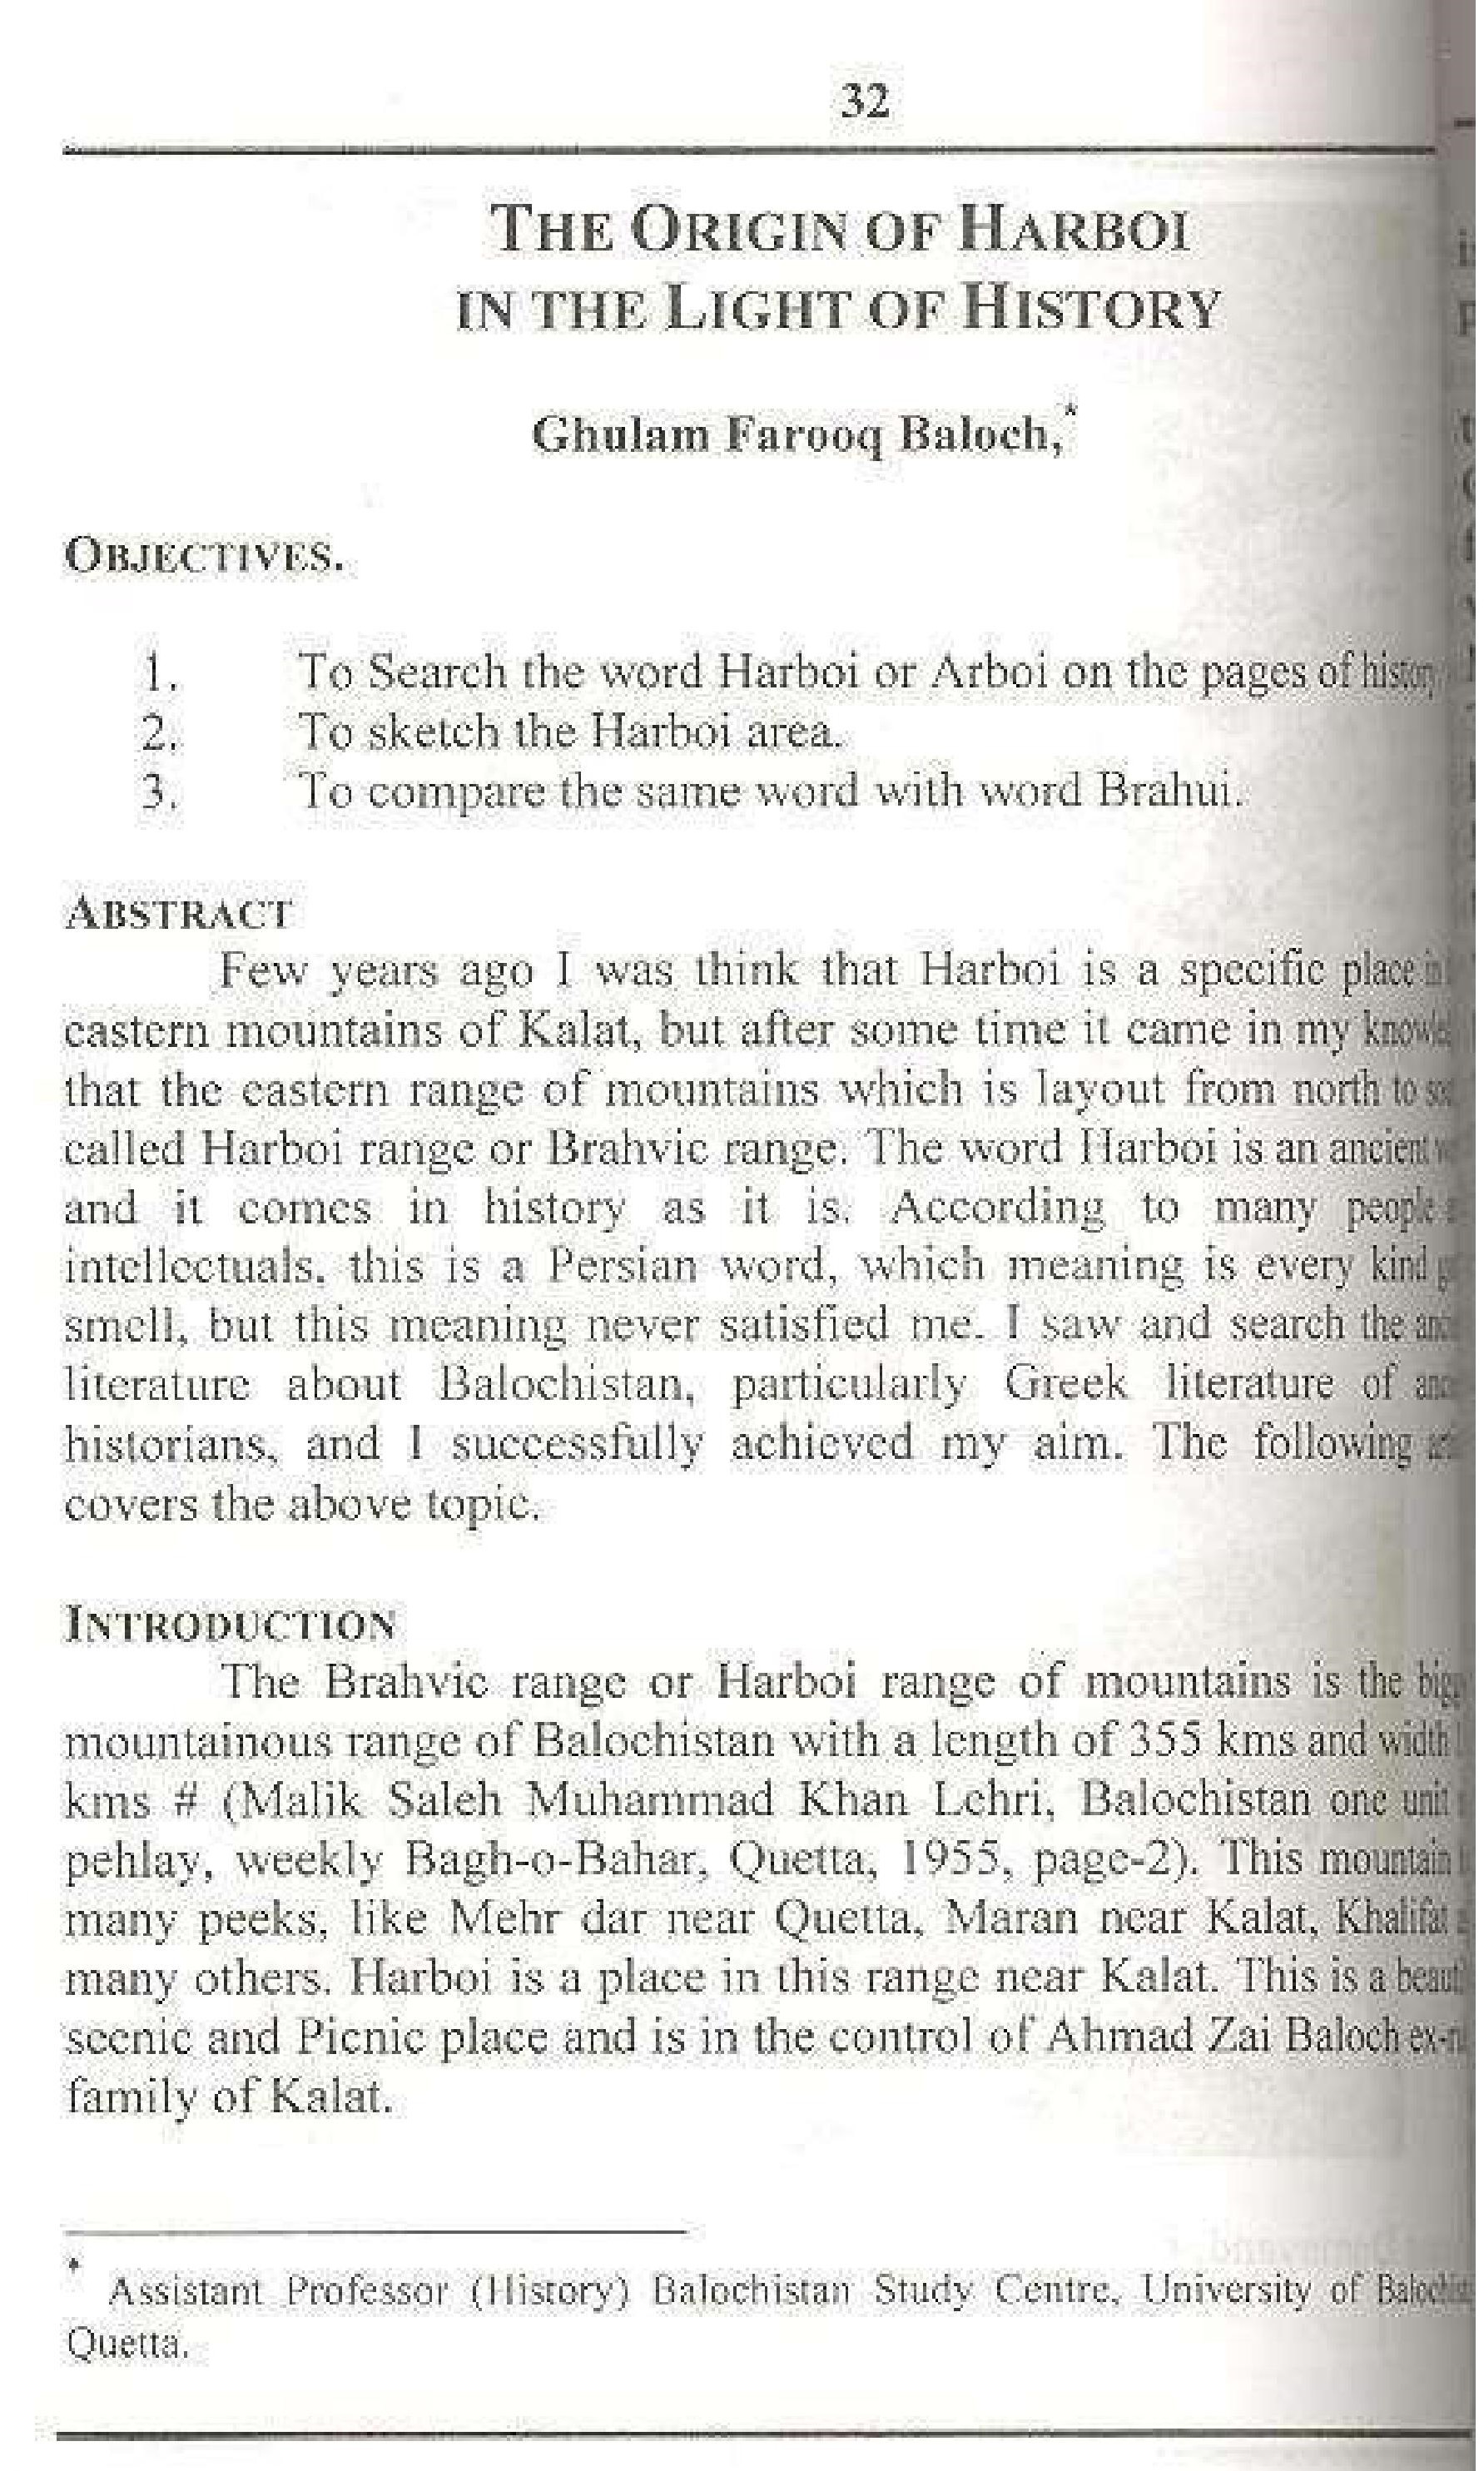 The Origin of Harboi in the Light of History.